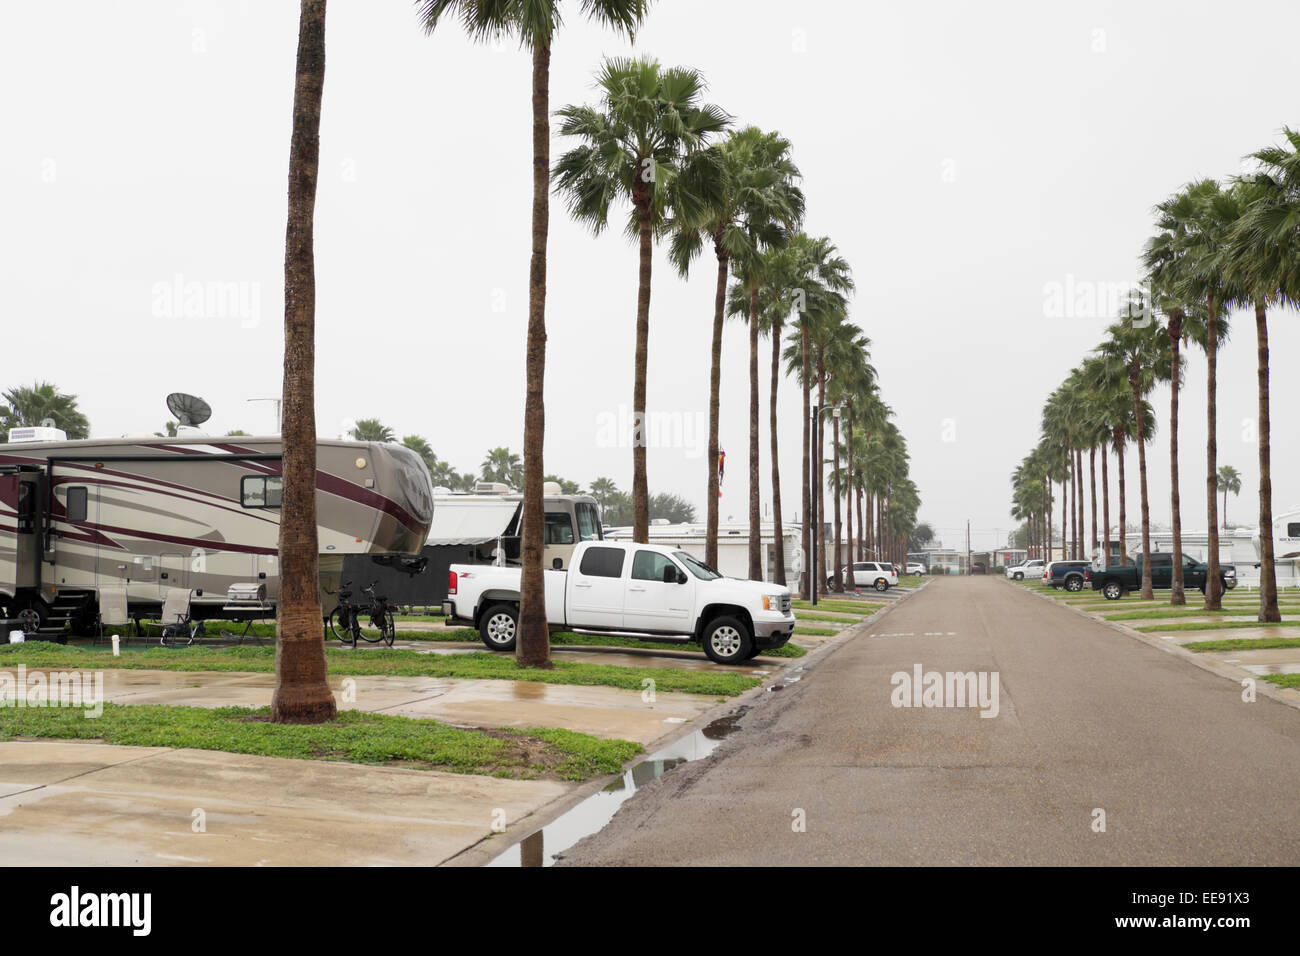 A street lined with Palm Trees in a retirement park in south Texas, USA on a rainy, overcast, dreary day. Stock Photo